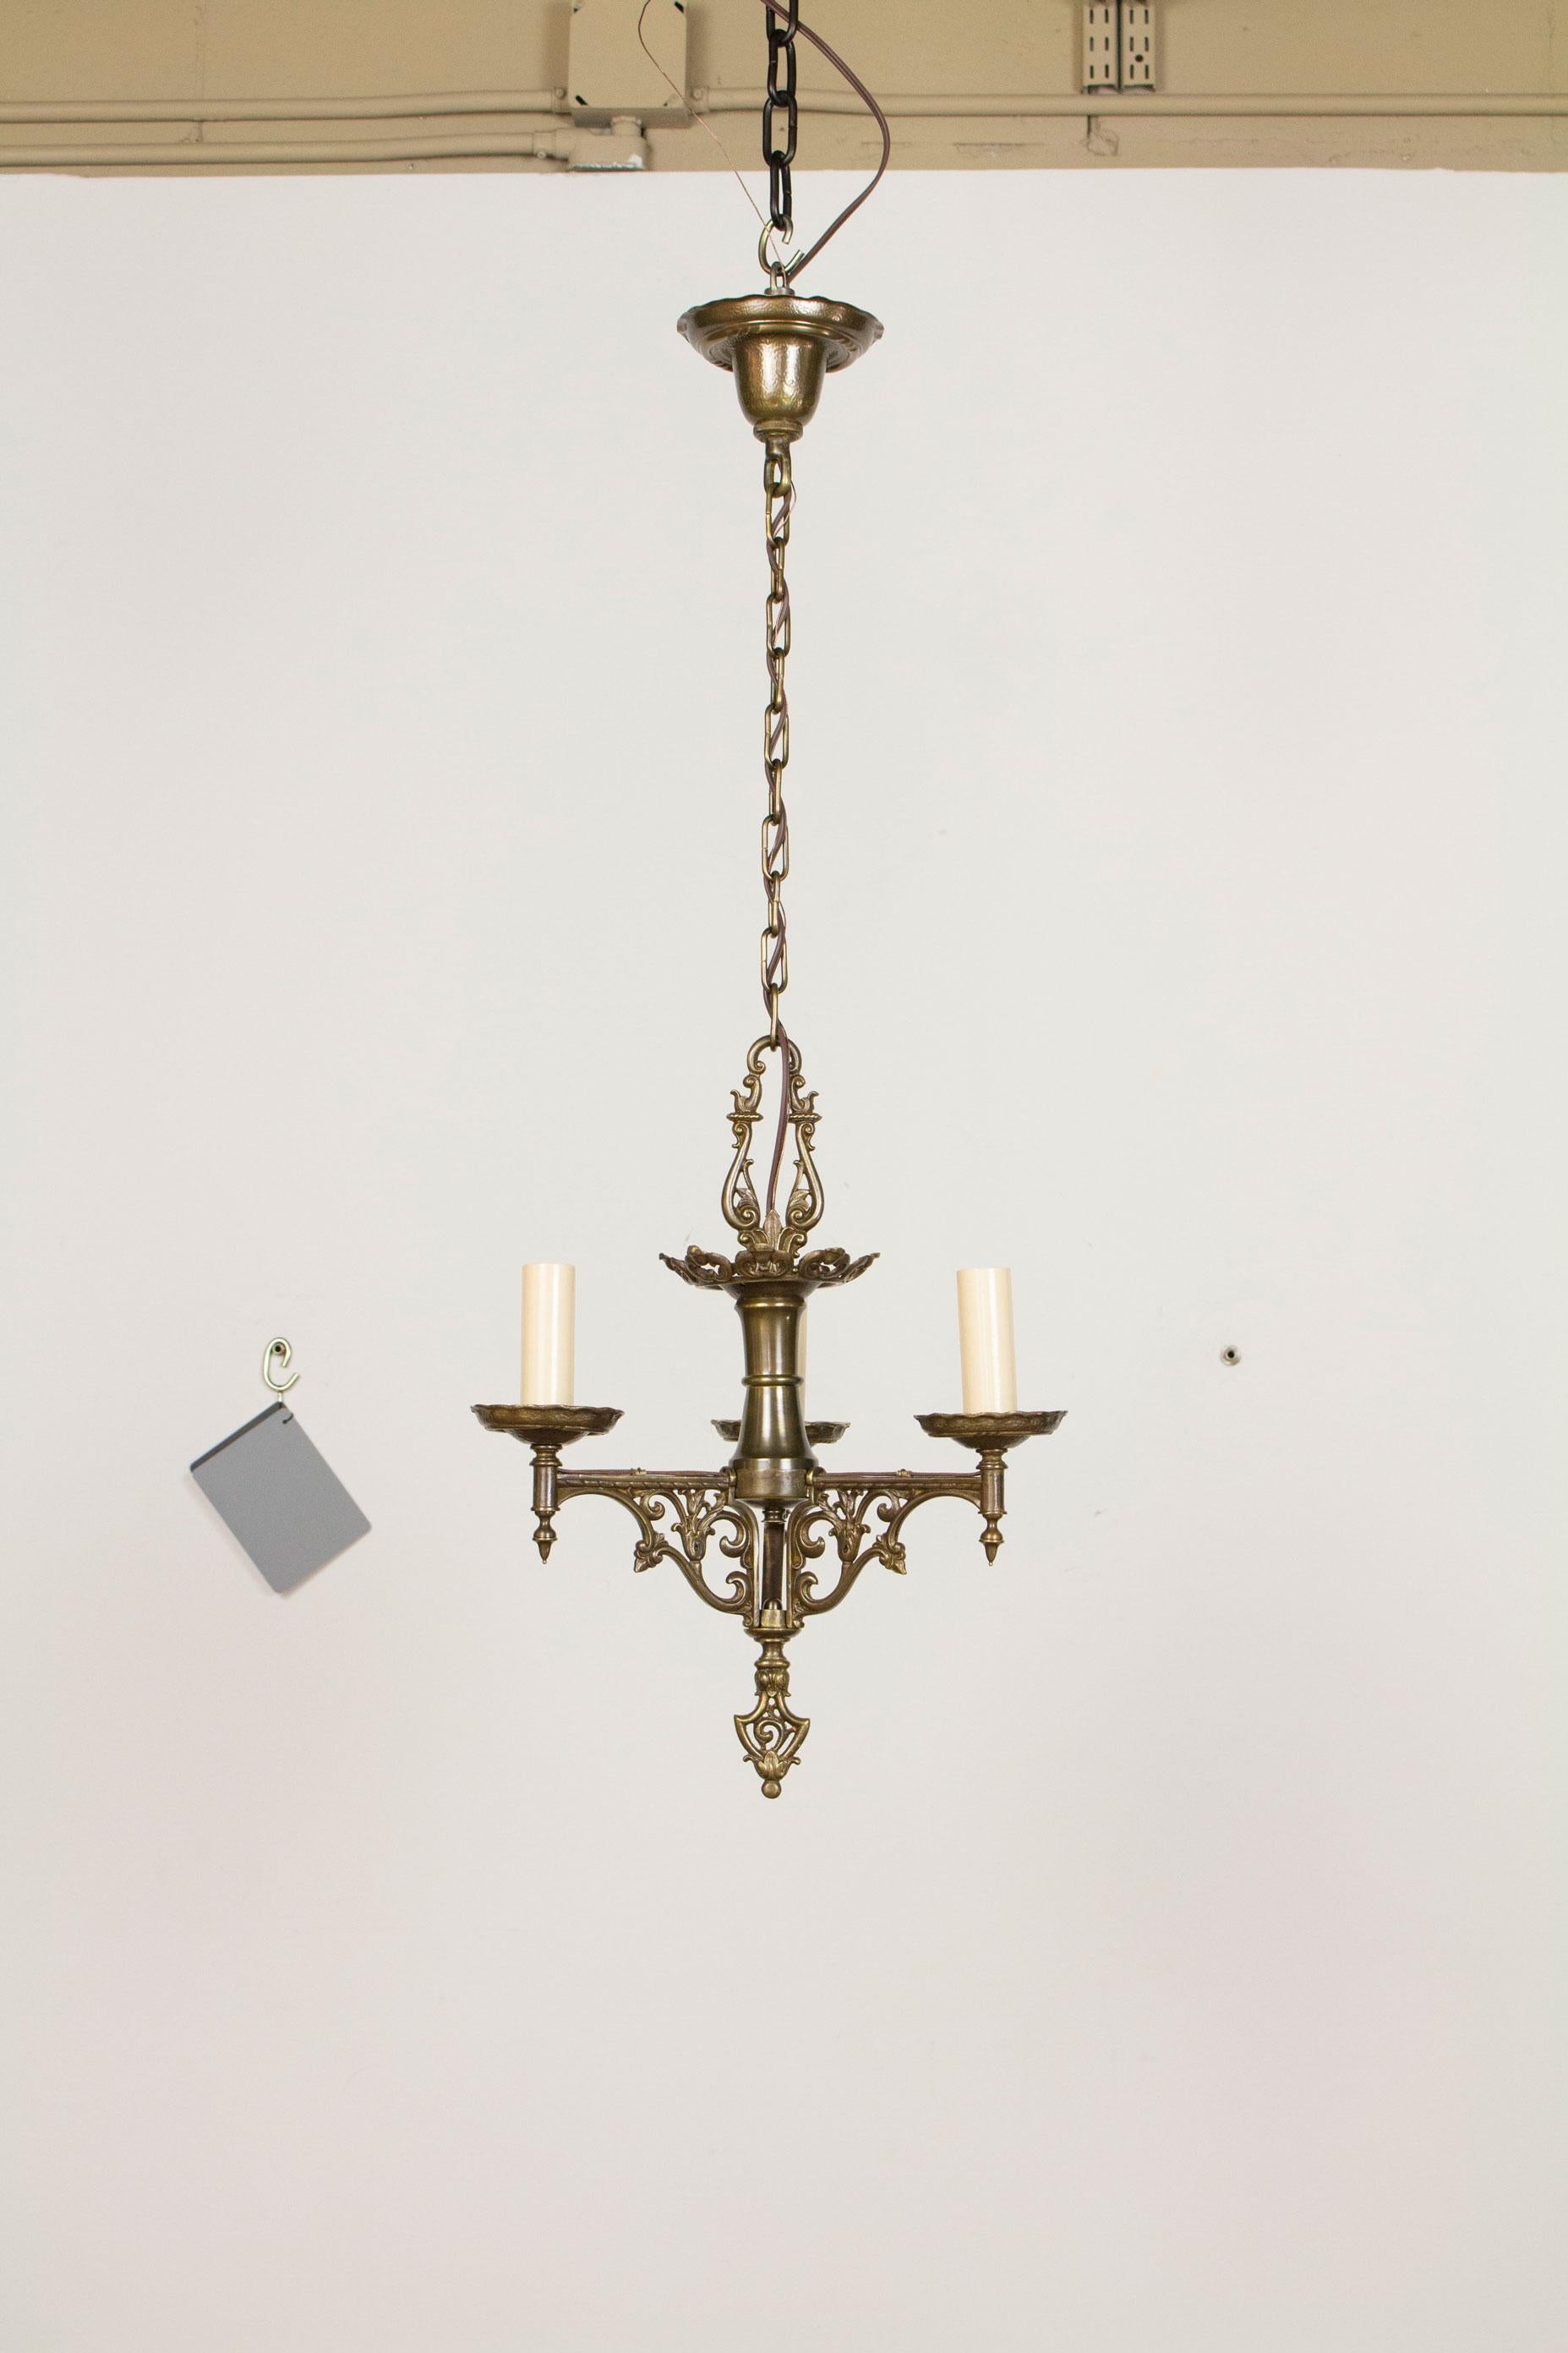 Early 20th Century Three Arm Spanish Revival Brass Chandelier For Sale 1